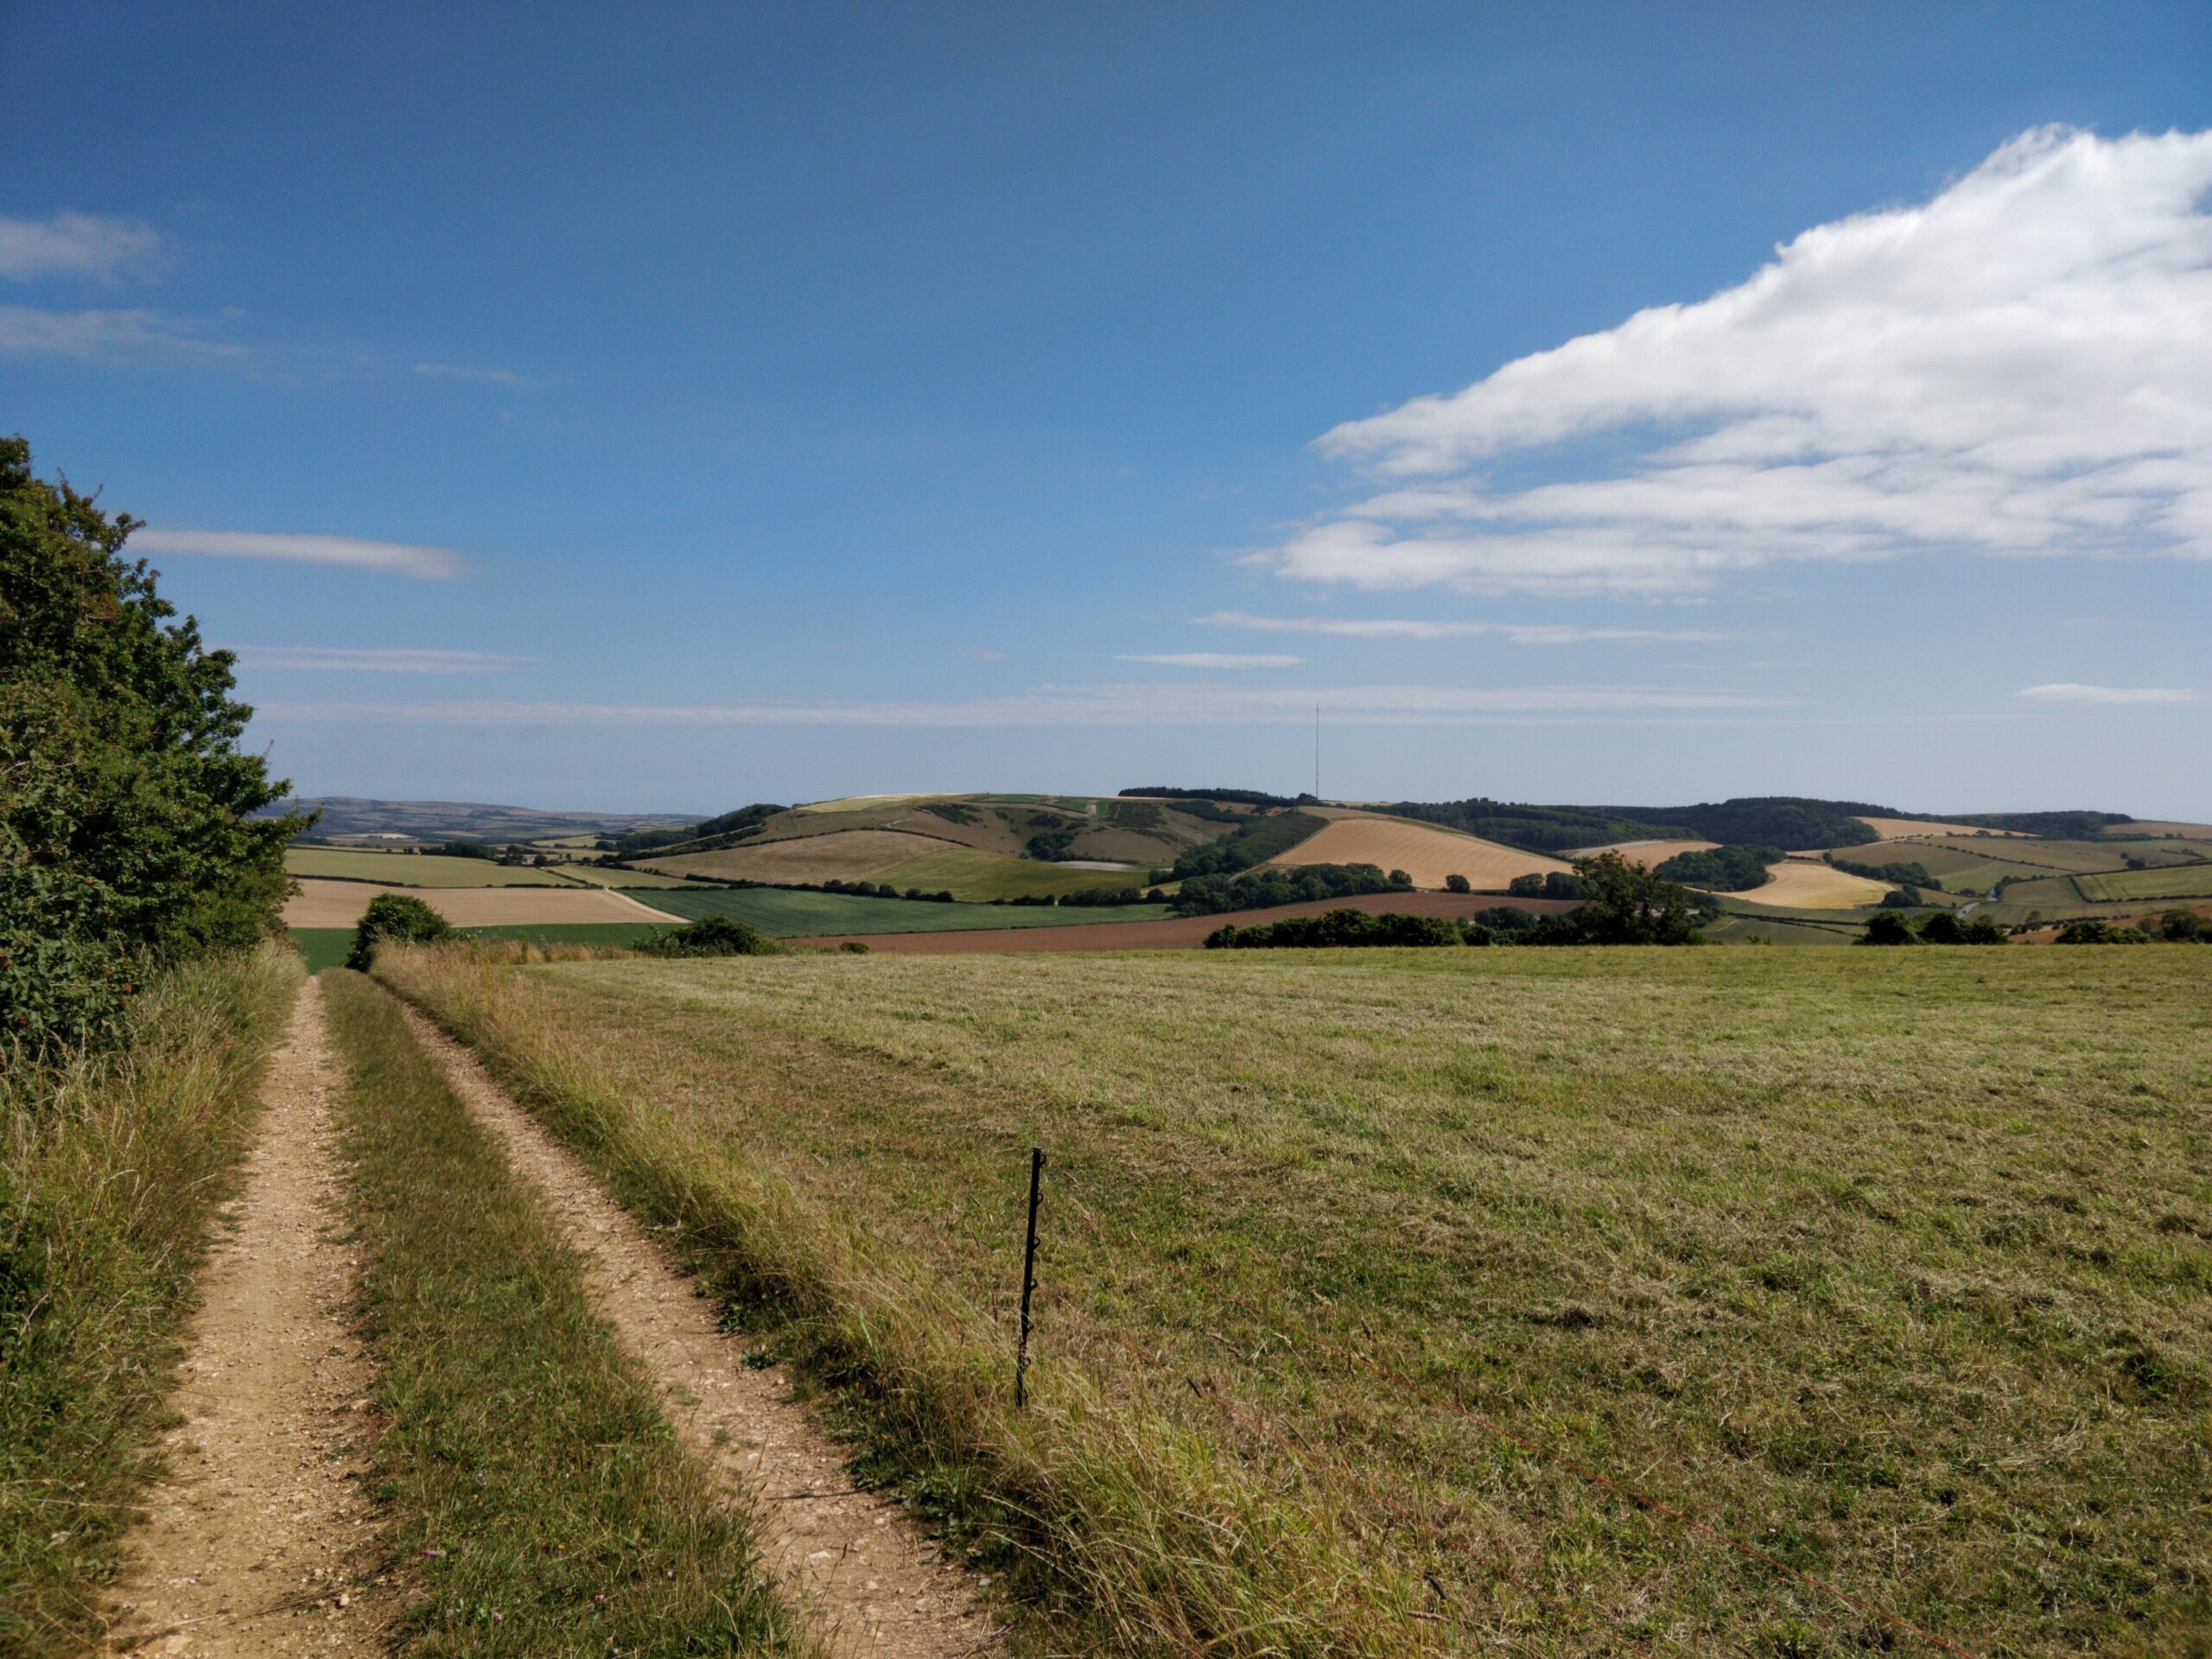 A view along a track looking over the edge of a high field, across a valley to more hills.